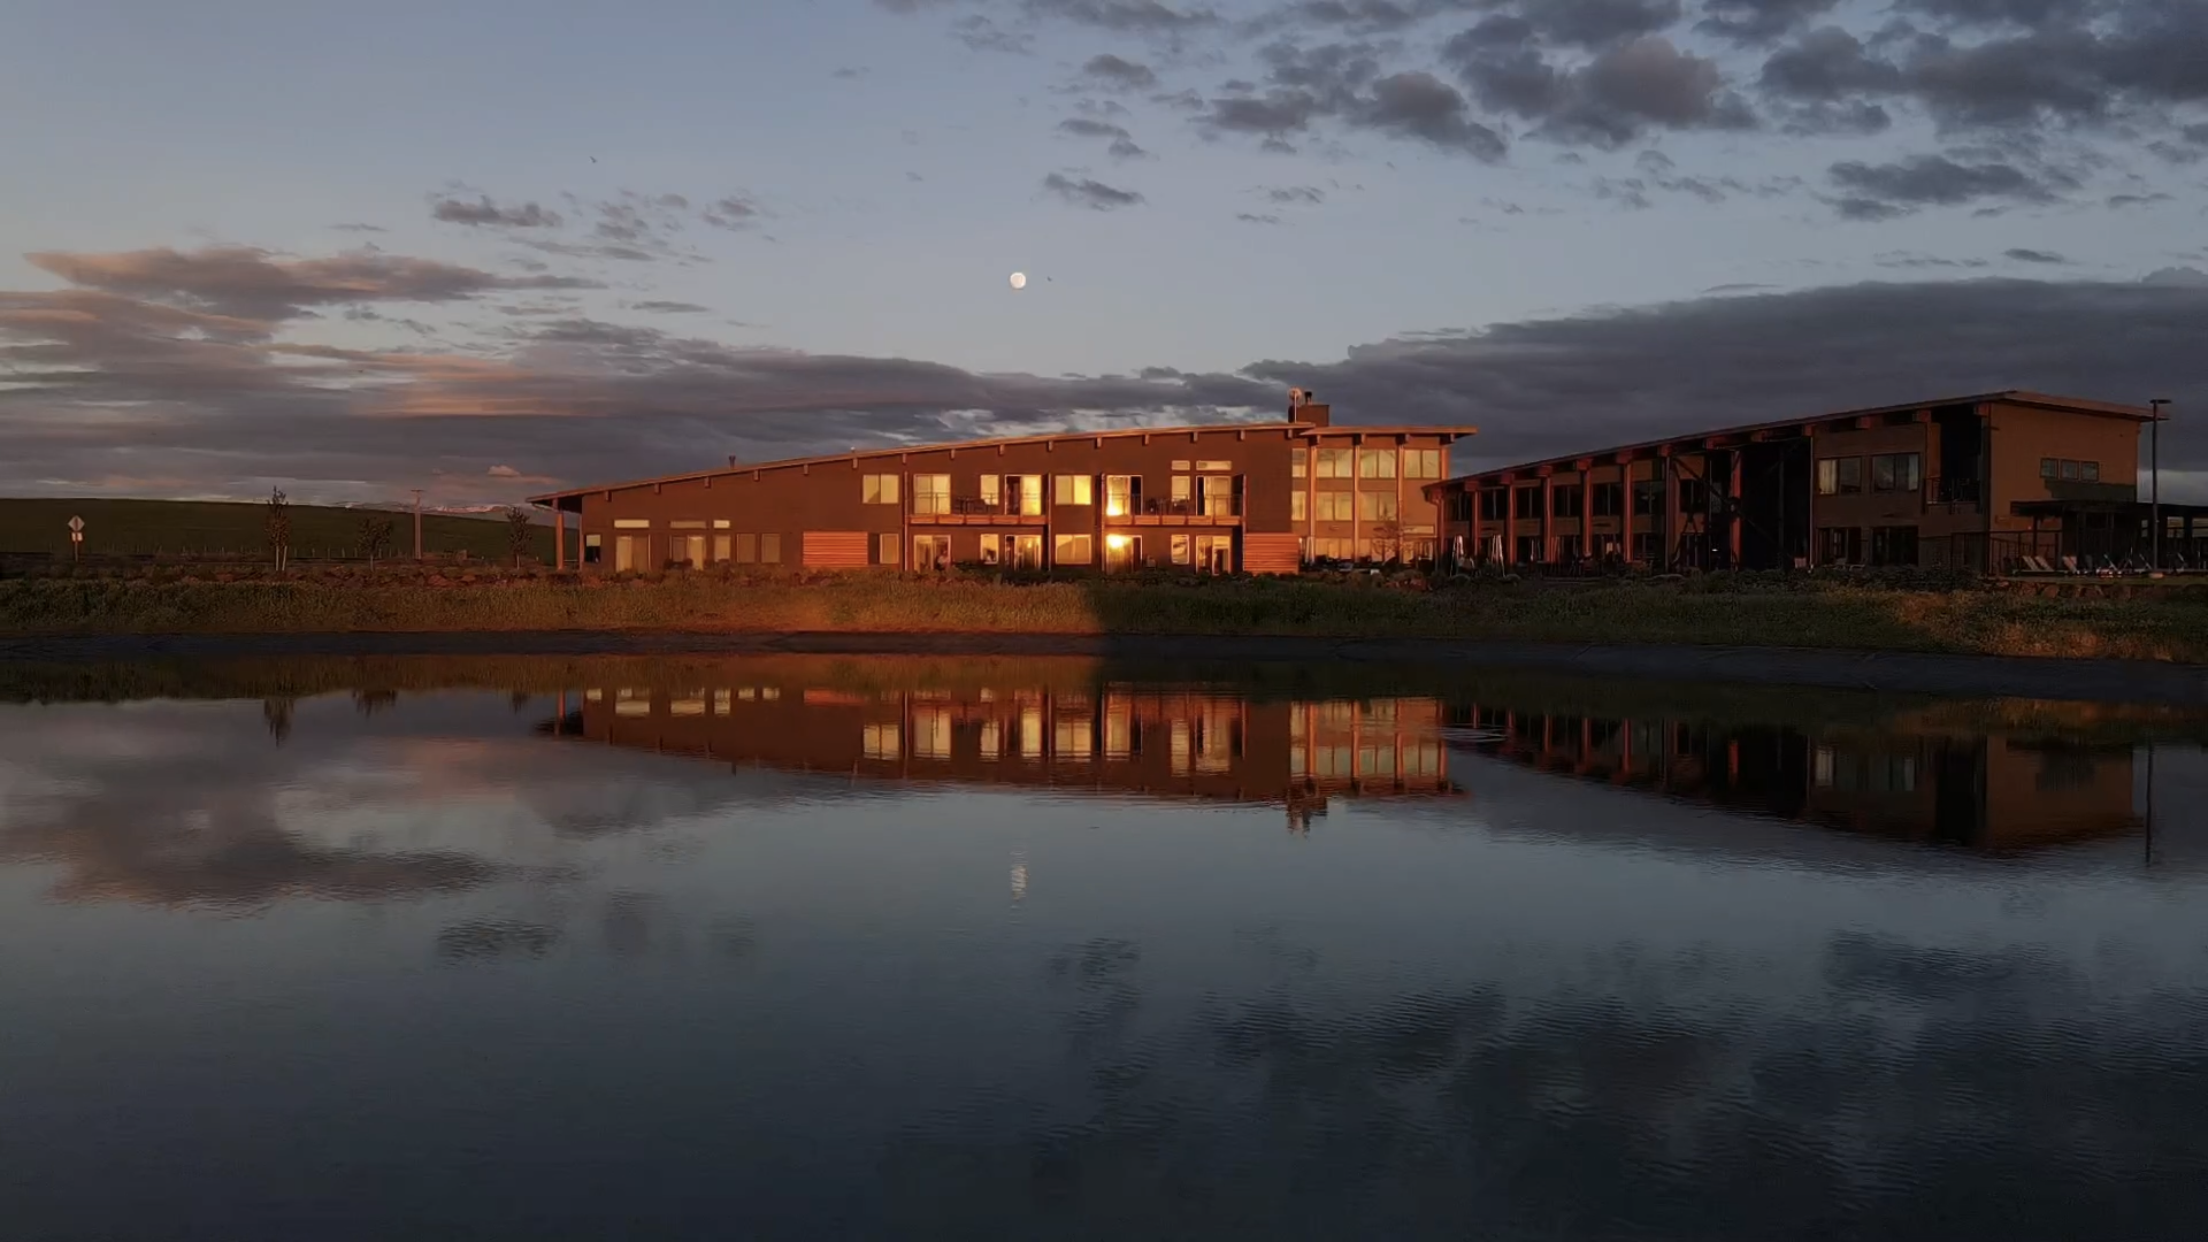 Eritage Resort in Walla Walla, during sunset with the moon just above the roofline